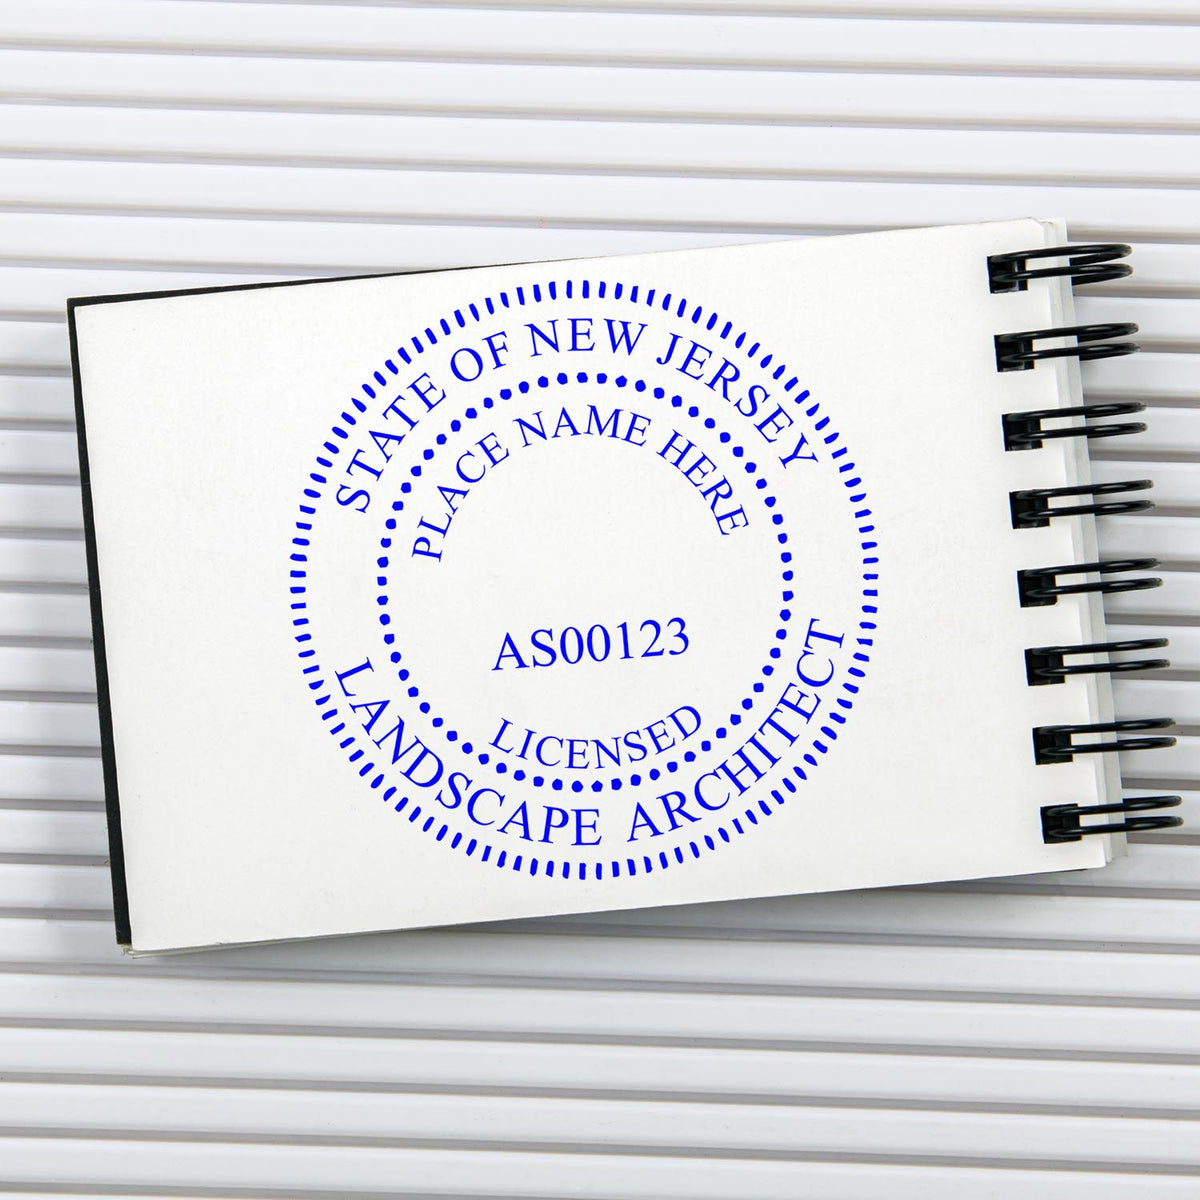 This paper is stamped with a sample imprint of the Self-Inking New Jersey Landscape Architect Stamp, signifying its quality and reliability.